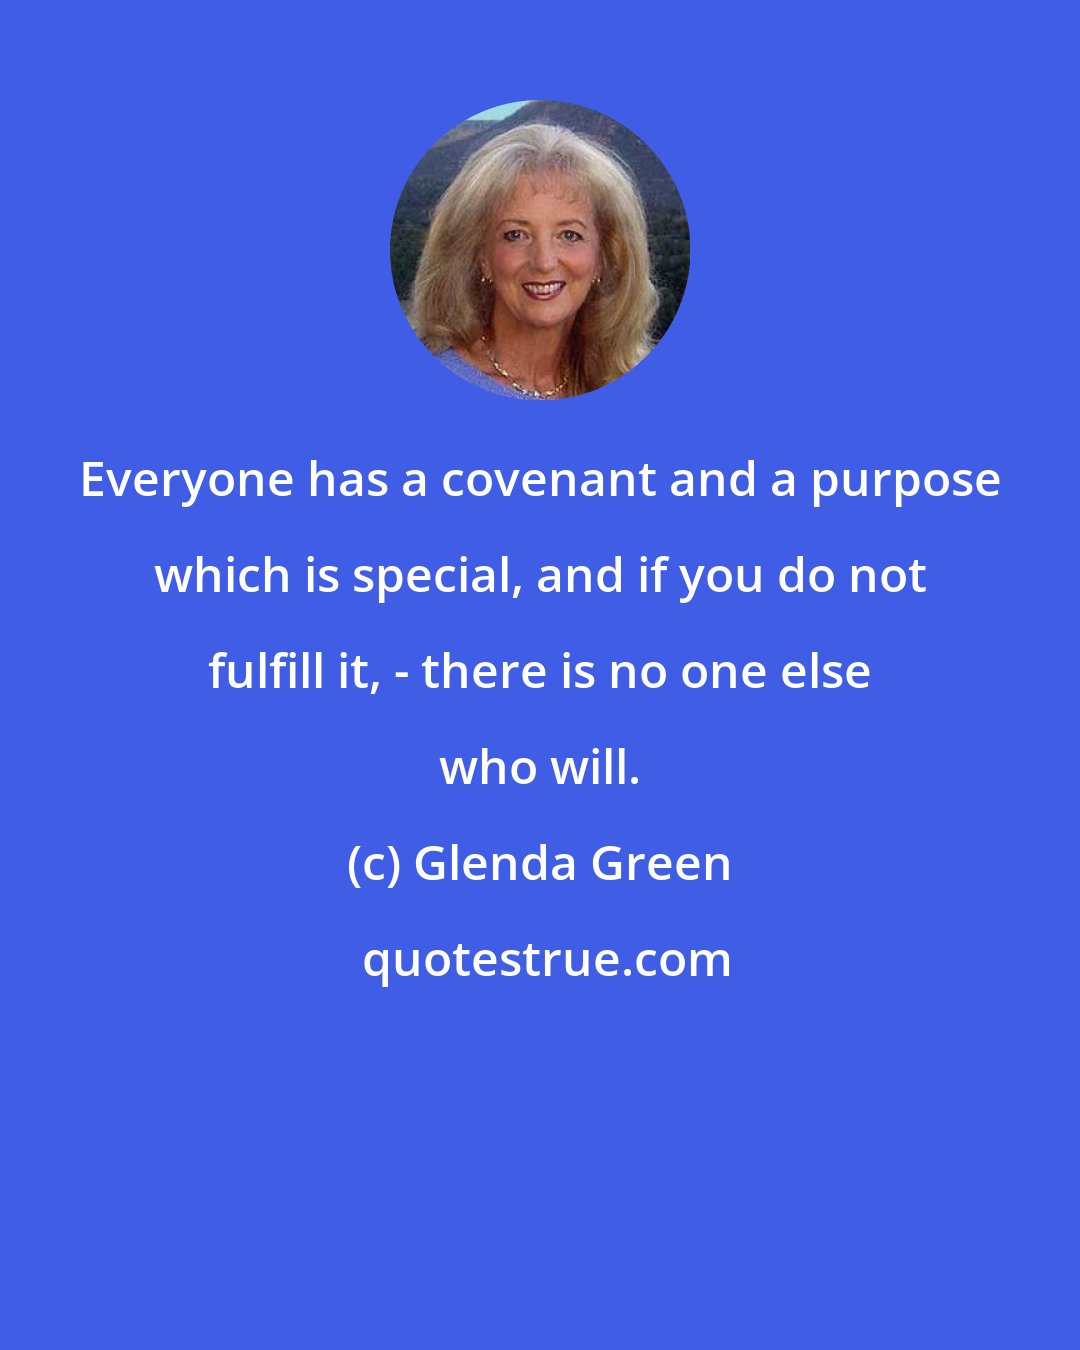 Glenda Green: Everyone has a covenant and a purpose which is special, and if you do not fulfill it, - there is no one else who will.